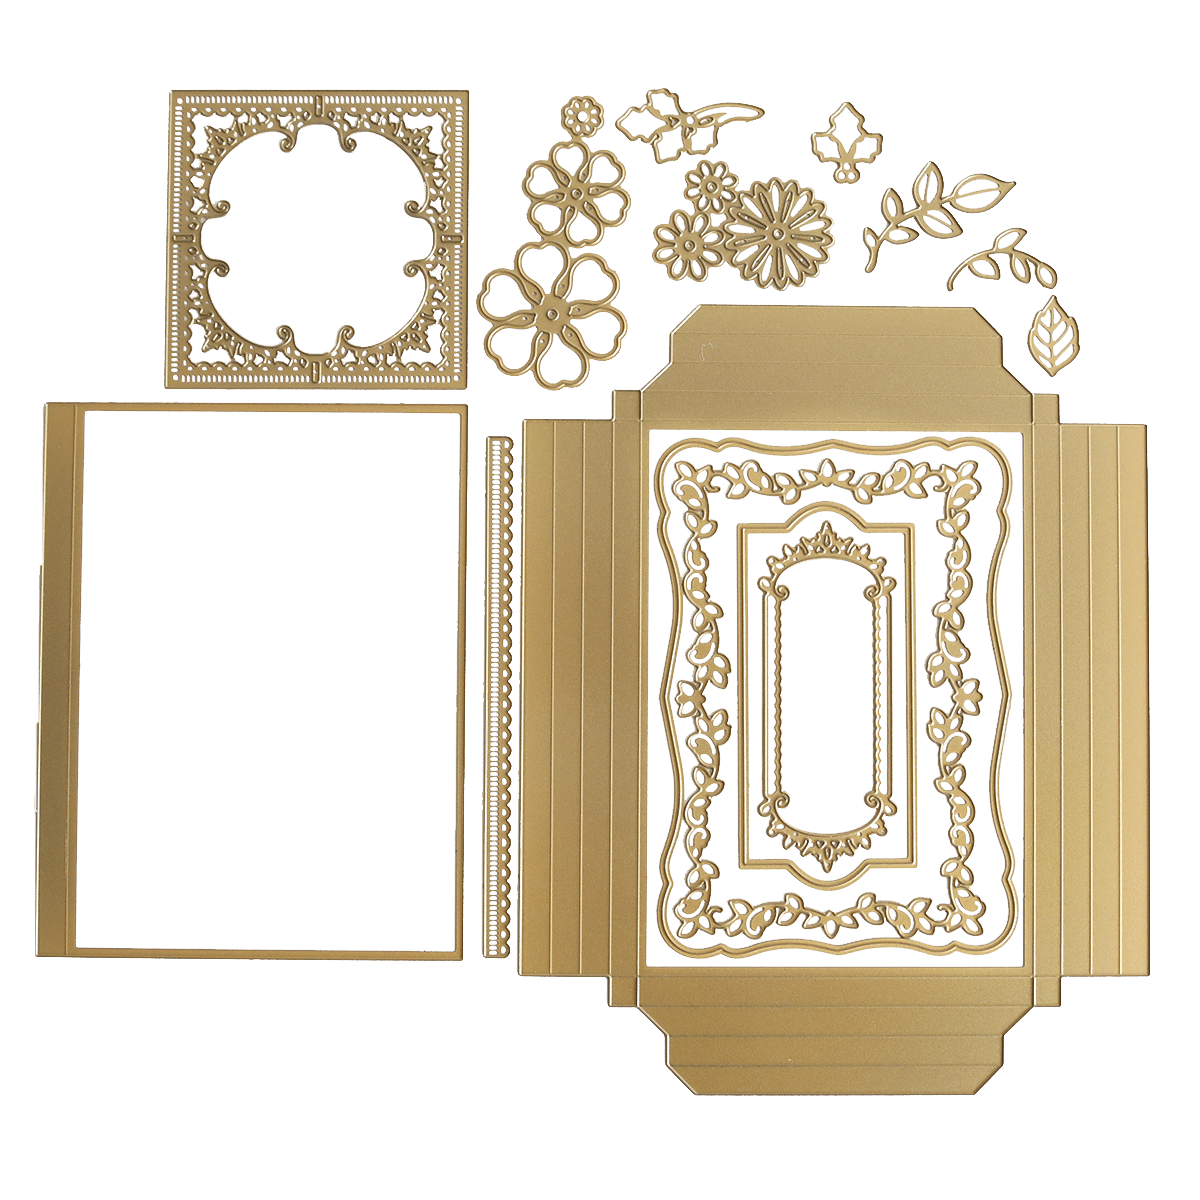 a set of decorative gold frames with a green background.